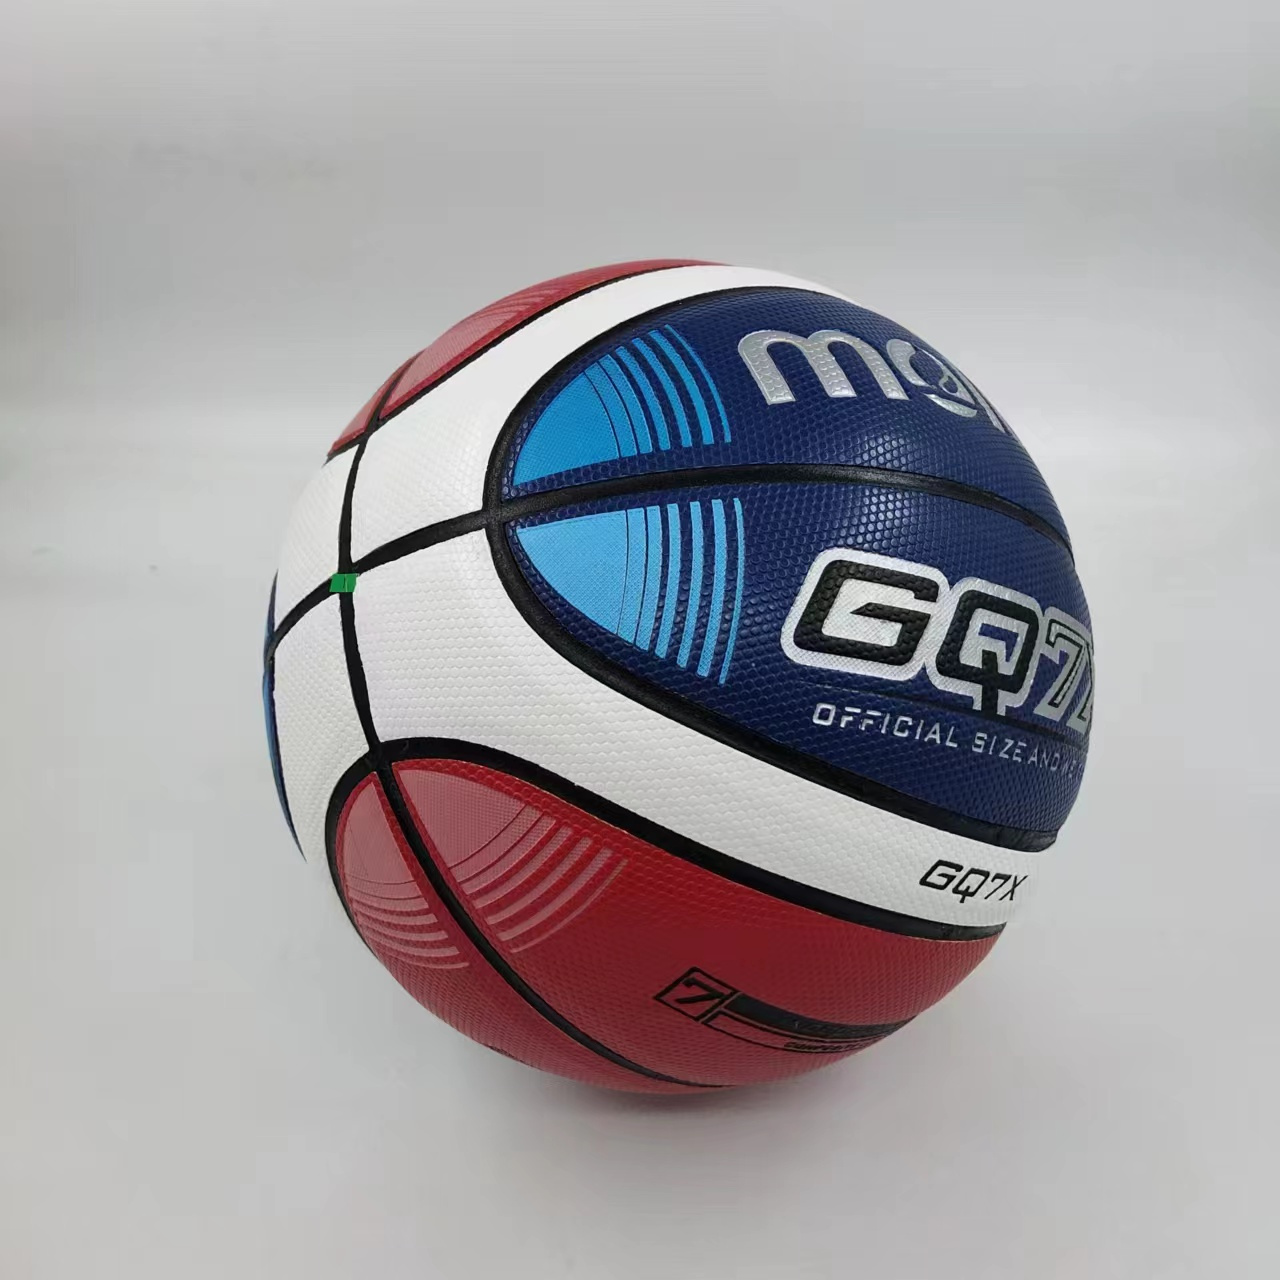 

1pc, Size 7 Sports Basketball, Wear-resistant And Durable Basketball, Suitable For Outdoor Indoor Training Competition